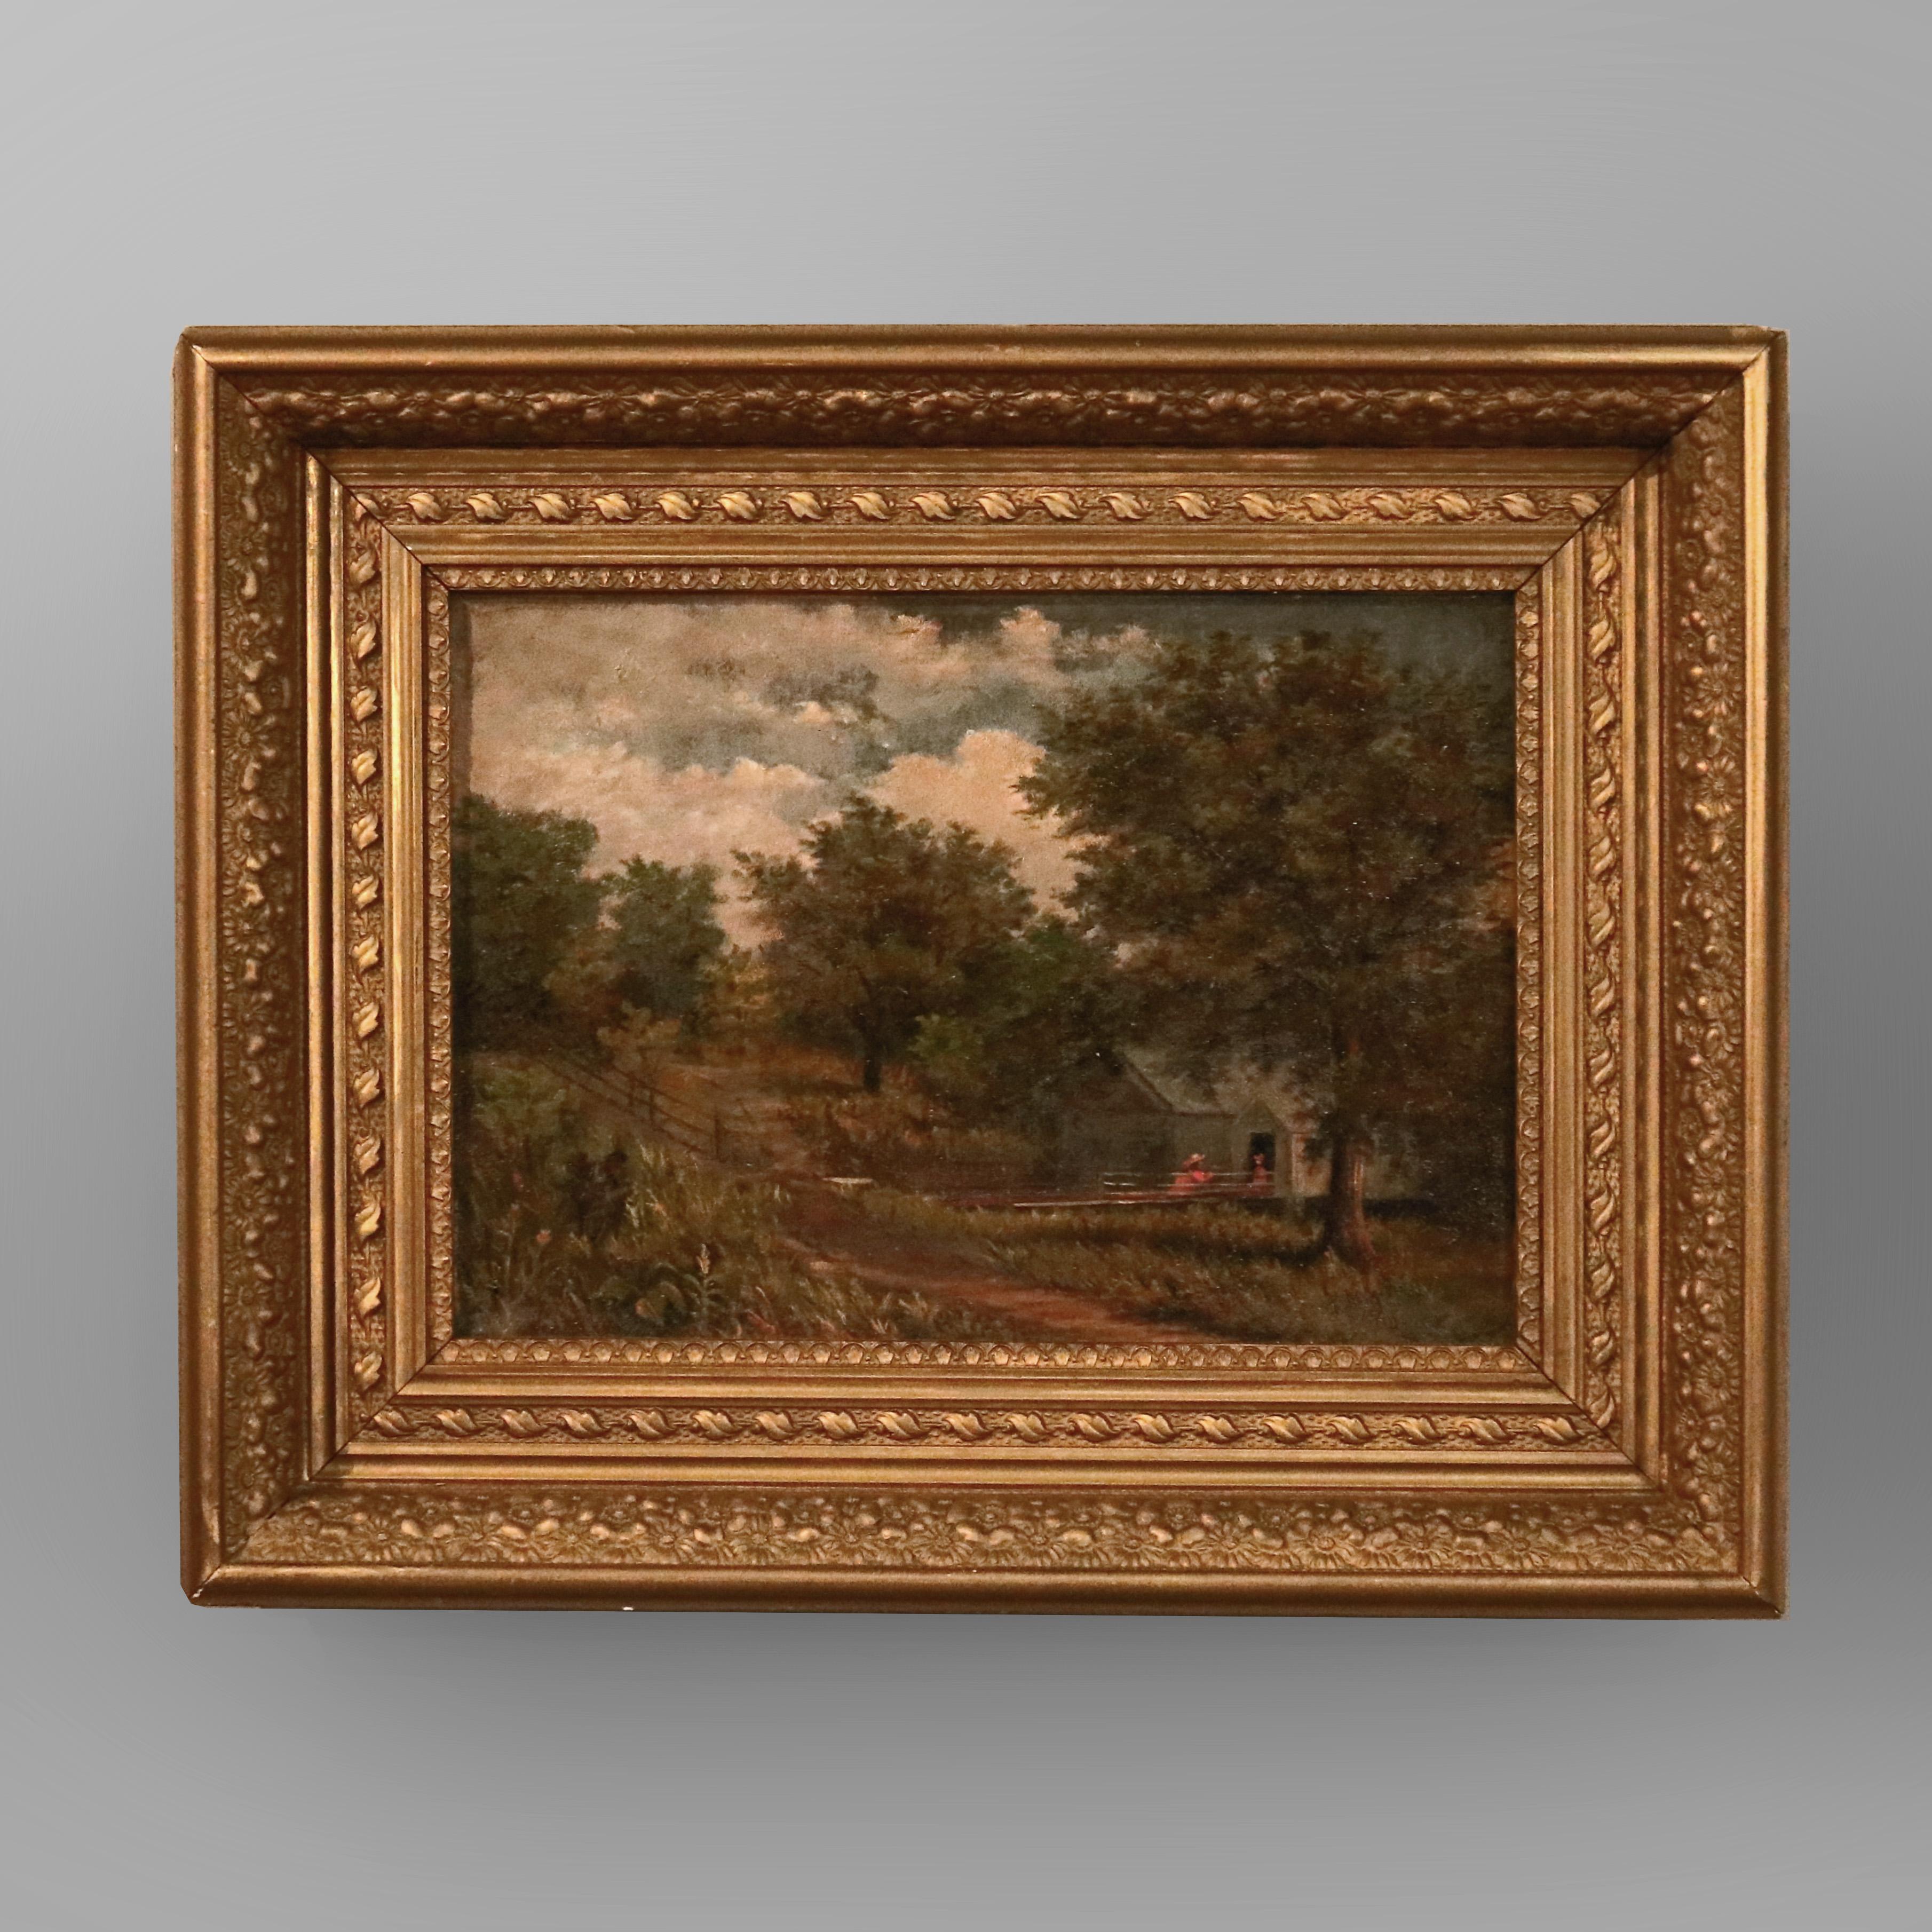 An antique Hudson River School painting offers oil on canvas landscape scene with girls (female figures), structures (possibly covered bridge) and meadow, seated in giltwood frame, c1890

Measures - 17.5''h x 21.25''w x 3.5''d; sight 10.75'' x